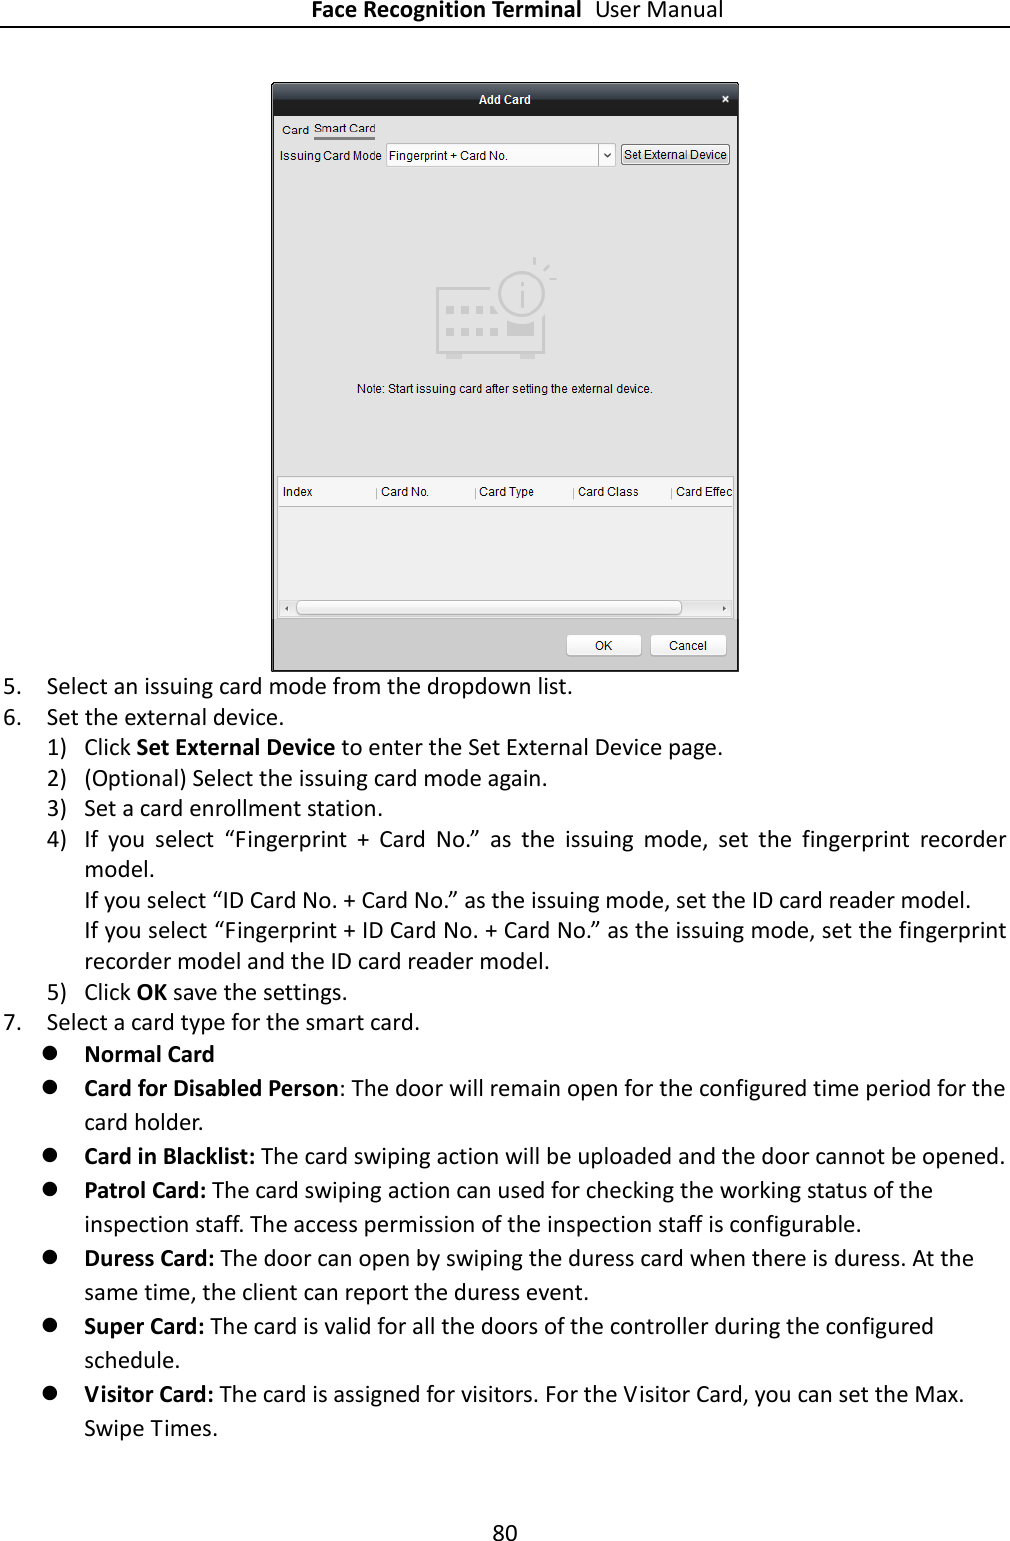 Face Recognition Terminal User Manual 80   5. Select an issuing card mode from the dropdown list. 6. Set the external device. 1) Click Set External Device to enter the Set External Device page. 2) (Optional) Select the issuing card mode again. 3) Set a card enrollment station. 4) If  you  select  “Fingerprint  +  Card  No.”  as  the  issuing  mode,  set  the  fingerprint  recorder model. If you select “ID Card No. + Card No.” as the issuing mode, set the ID card reader model. If you select “Fingerprint + ID Card No. + Card No.” as the issuing mode, set the fingerprint recorder model and the ID card reader model. 5) Click OK save the settings. 7. Select a card type for the smart card.  Normal Card  Card for Disabled Person: The door will remain open for the configured time period for the card holder.  Card in Blacklist: The card swiping action will be uploaded and the door cannot be opened.  Patrol Card: The card swiping action can used for checking the working status of the inspection staff. The access permission of the inspection staff is configurable.  Duress Card: The door can open by swiping the duress card when there is duress. At the same time, the client can report the duress event.  Super Card: The card is valid for all the doors of the controller during the configured schedule.  Visitor Card: The card is assigned for visitors. For the Visitor Card, you can set the Max. Swipe Times. 